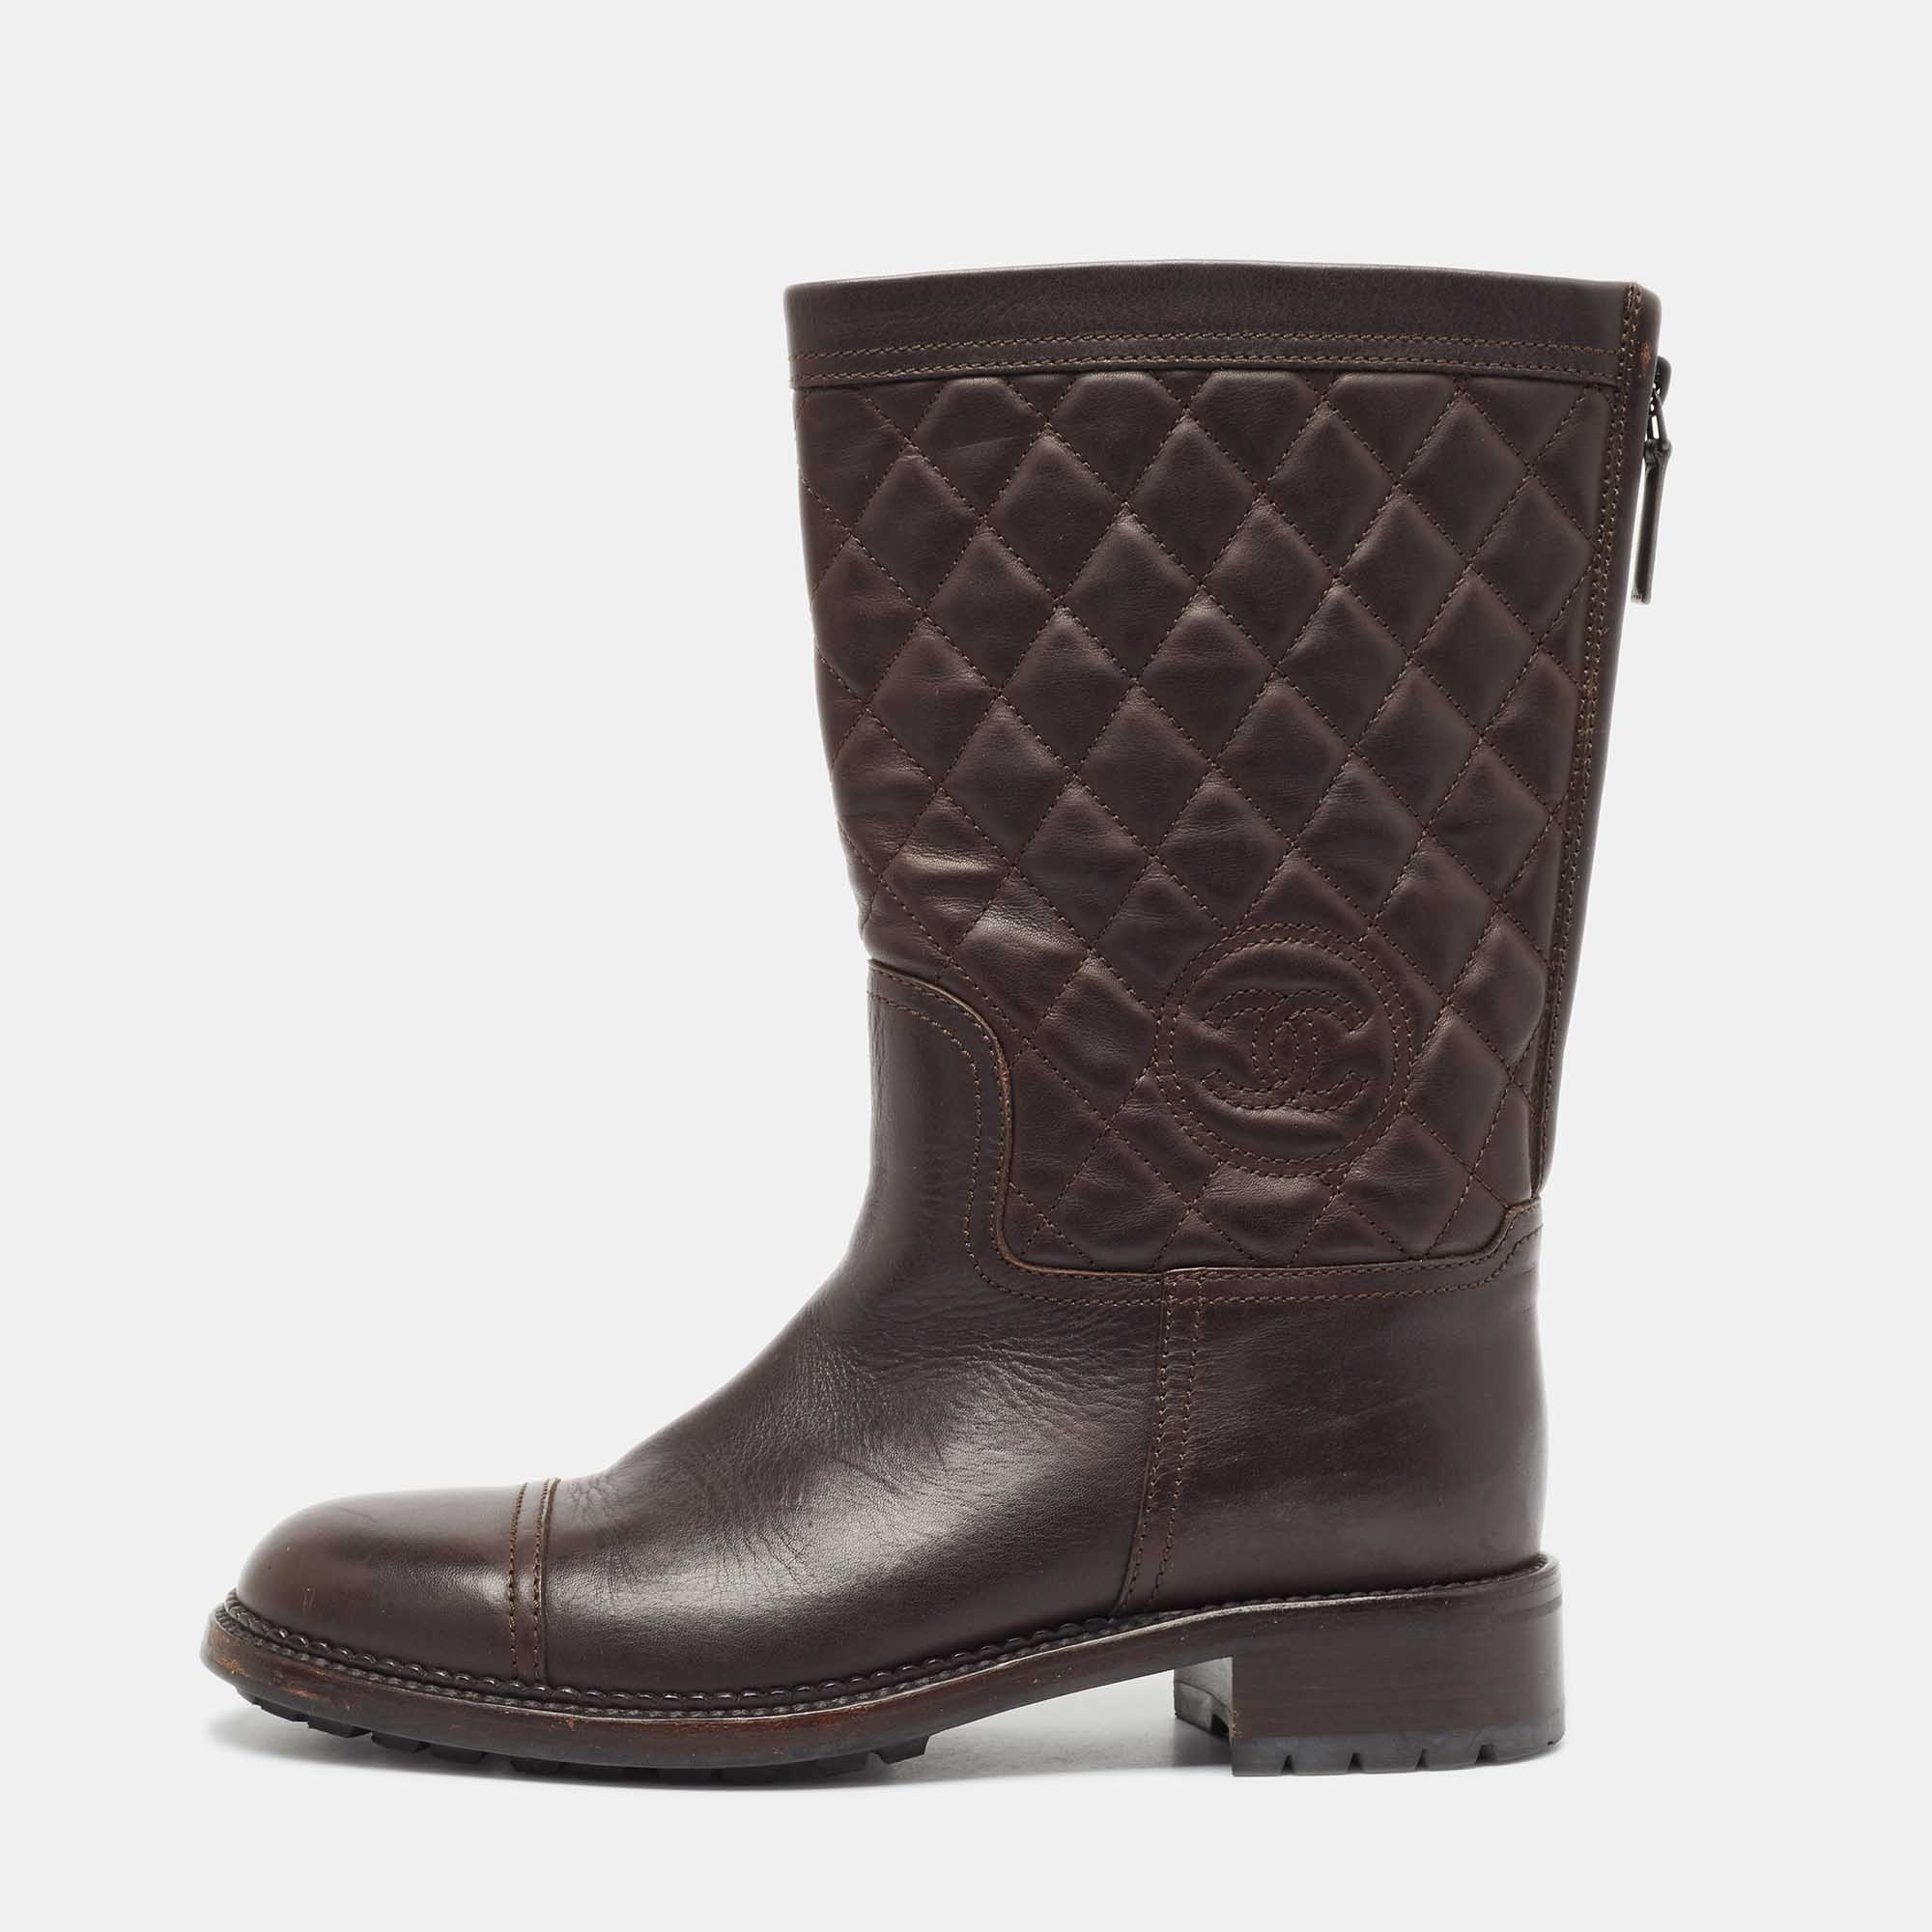 Chanel brown quilted leather cc moto boots size 39.5